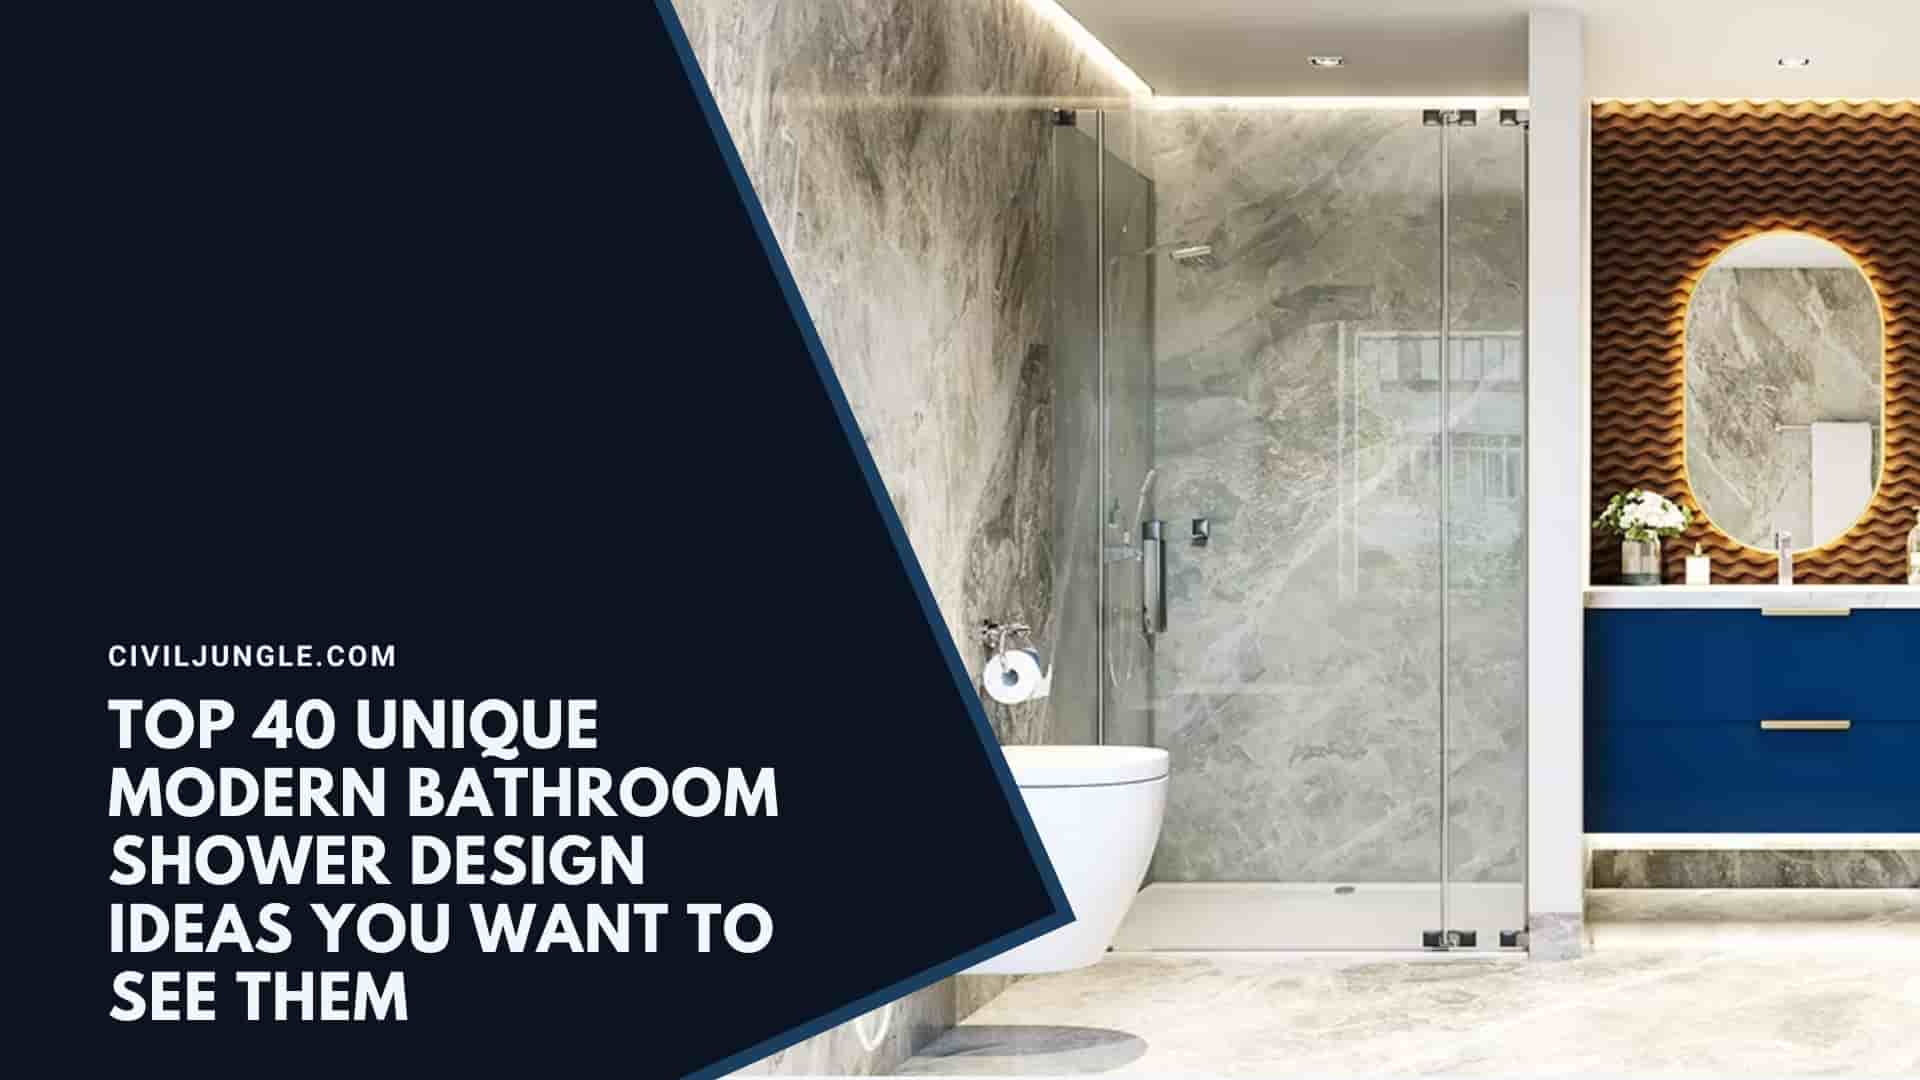 Top 40 Unique Modern Bathroom Shower Design Ideas You Want To See Them